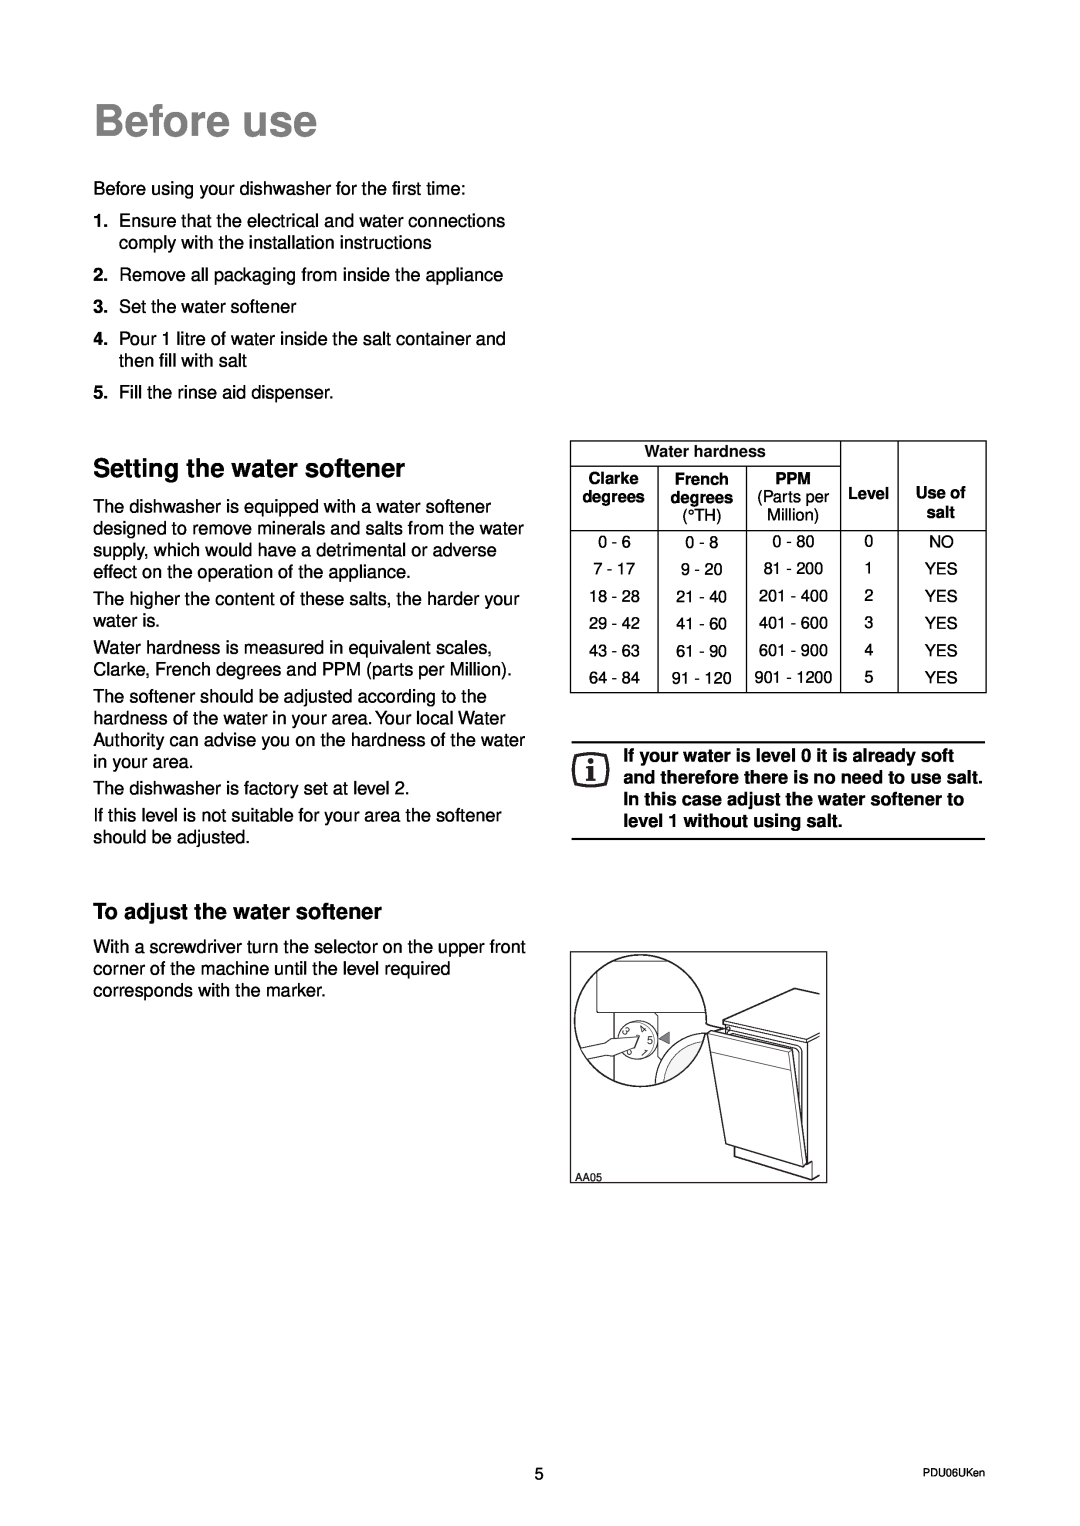 Zanussi DWS 935 manual Before use, Setting the water softener, To adjust the water softener 